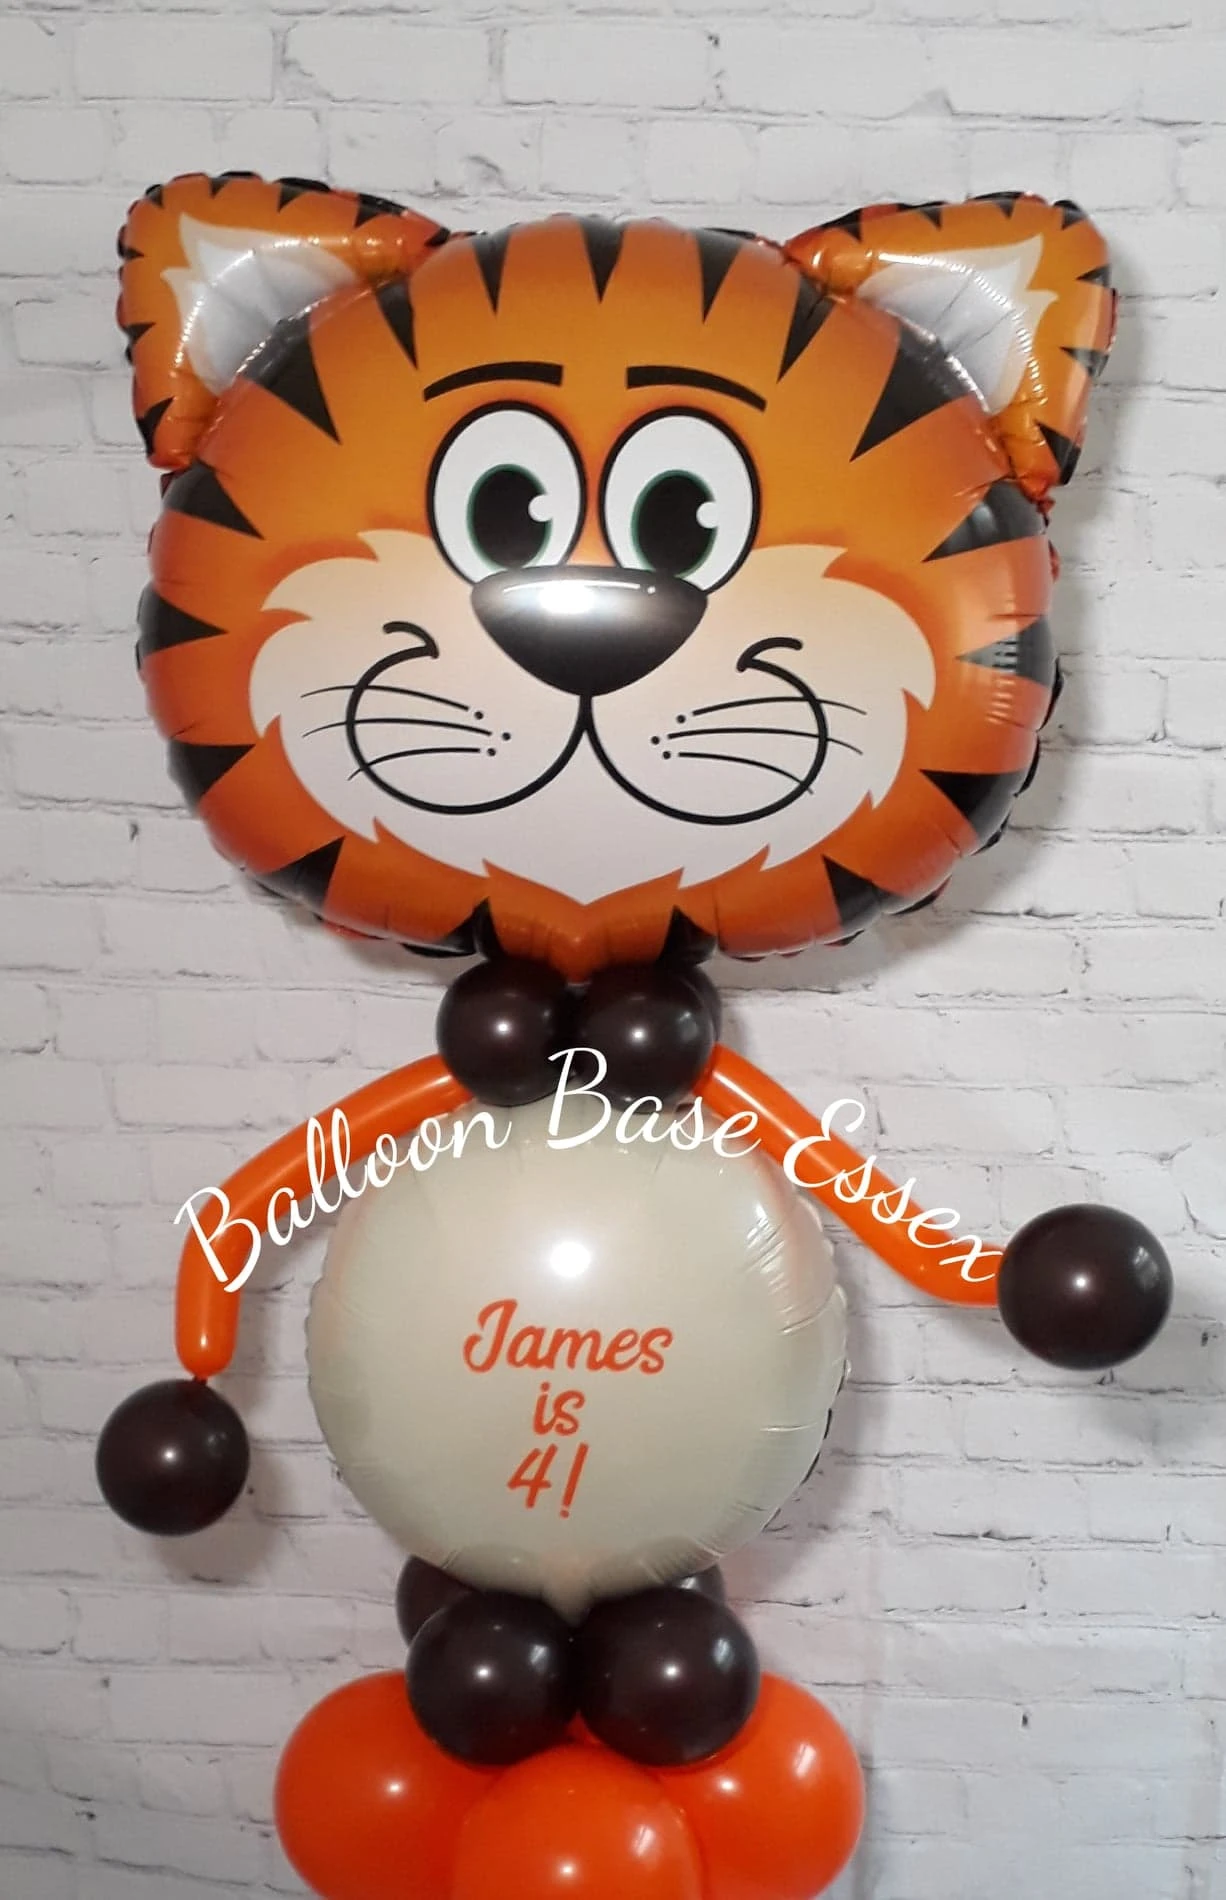 Orange tiger balloon buddy with a personalised message